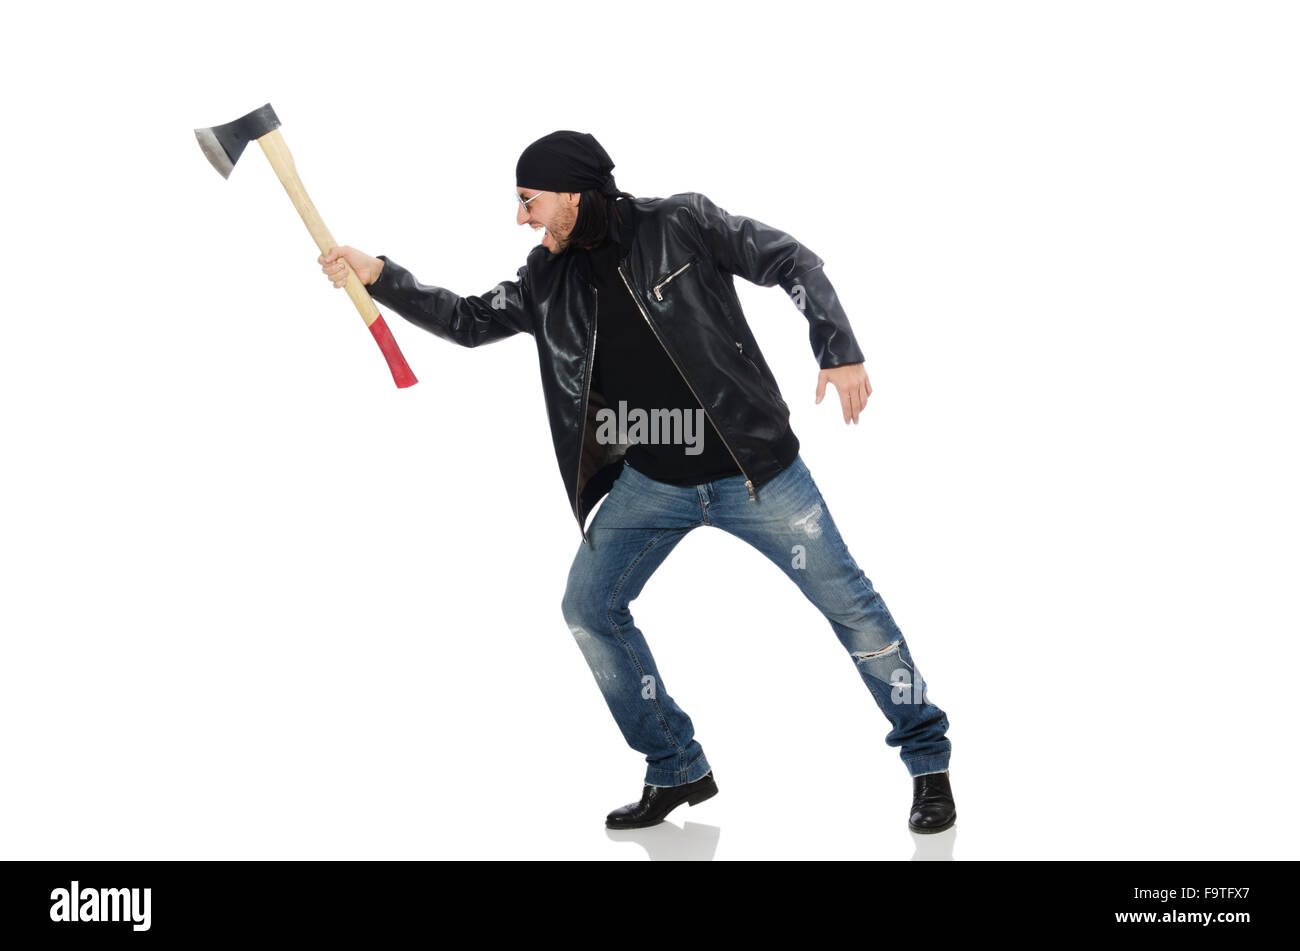 Angry man with axe isolated on white Stock Photo: 92123087 - Alamy